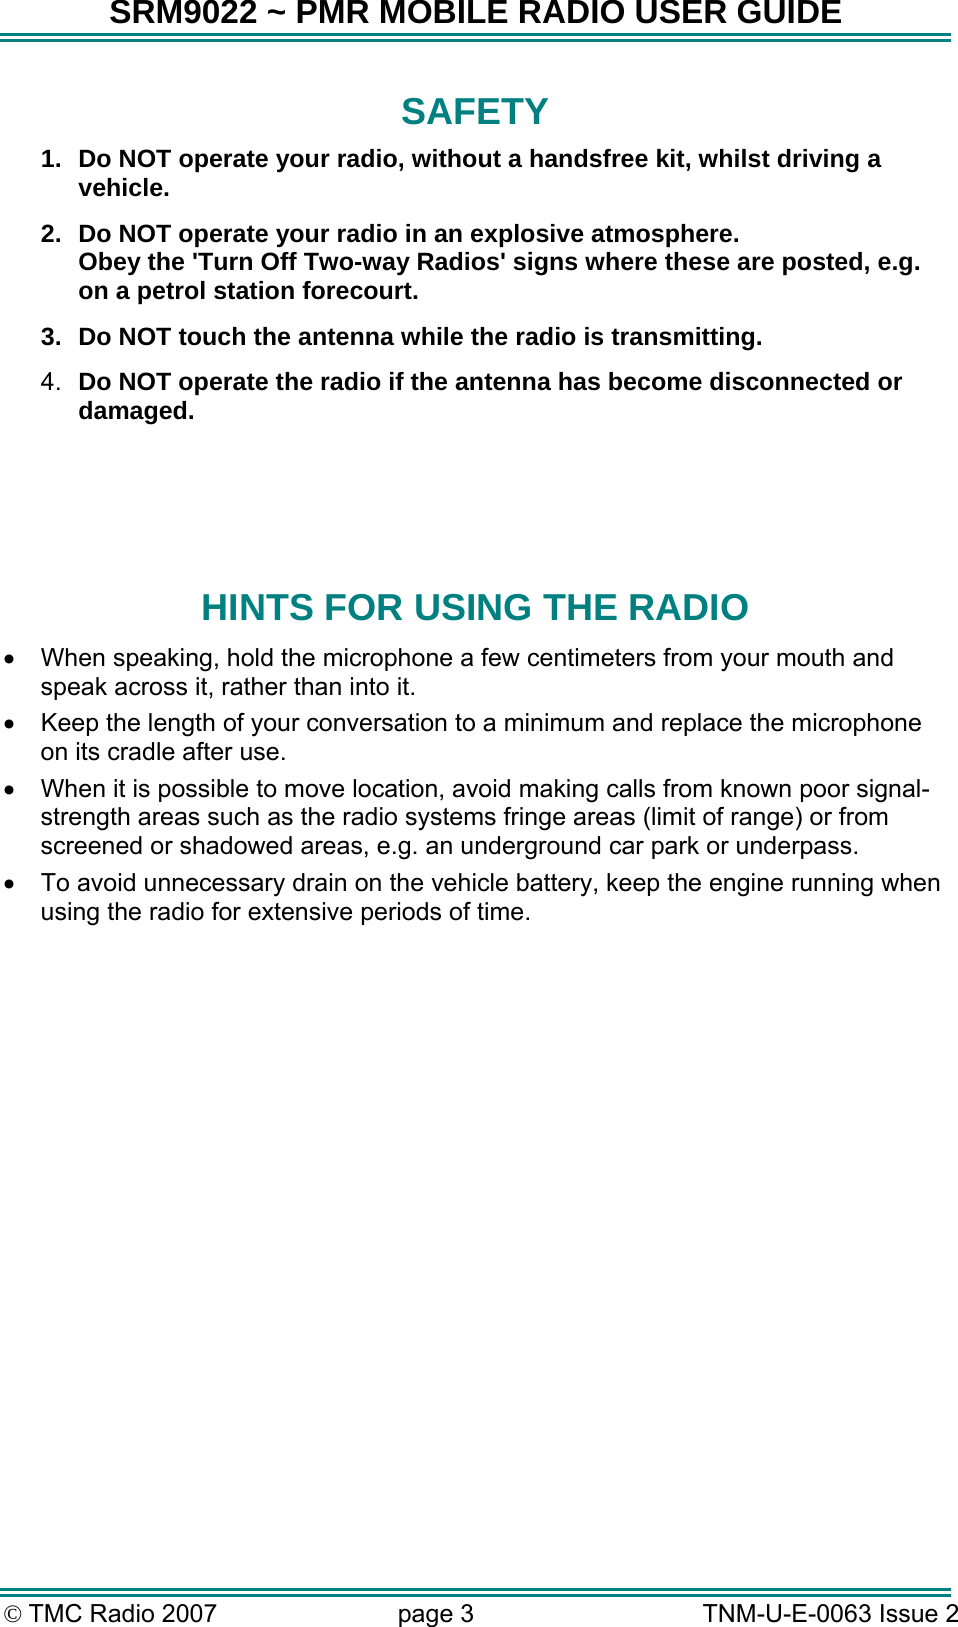 SRM9022 ~ PMR MOBILE RADIO USER GUIDE © TMC Radio 2007  page 3   TNM-U-E-0063 Issue 2 SAFETY 1.  Do NOT operate your radio, without a handsfree kit, whilst driving a vehicle. 2.  Do NOT operate your radio in an explosive atmosphere. Obey the &apos;Turn Off Two-way Radios&apos; signs where these are posted, e.g. on a petrol station forecourt. 3.  Do NOT touch the antenna while the radio is transmitting. 4.  Do NOT operate the radio if the antenna has become disconnected or damaged.    HINTS FOR USING THE RADIO •  When speaking, hold the microphone a few centimeters from your mouth and speak across it, rather than into it. •  Keep the length of your conversation to a minimum and replace the microphone on its cradle after use. •  When it is possible to move location, avoid making calls from known poor signal-strength areas such as the radio systems fringe areas (limit of range) or from screened or shadowed areas, e.g. an underground car park or underpass. •  To avoid unnecessary drain on the vehicle battery, keep the engine running when using the radio for extensive periods of time.  